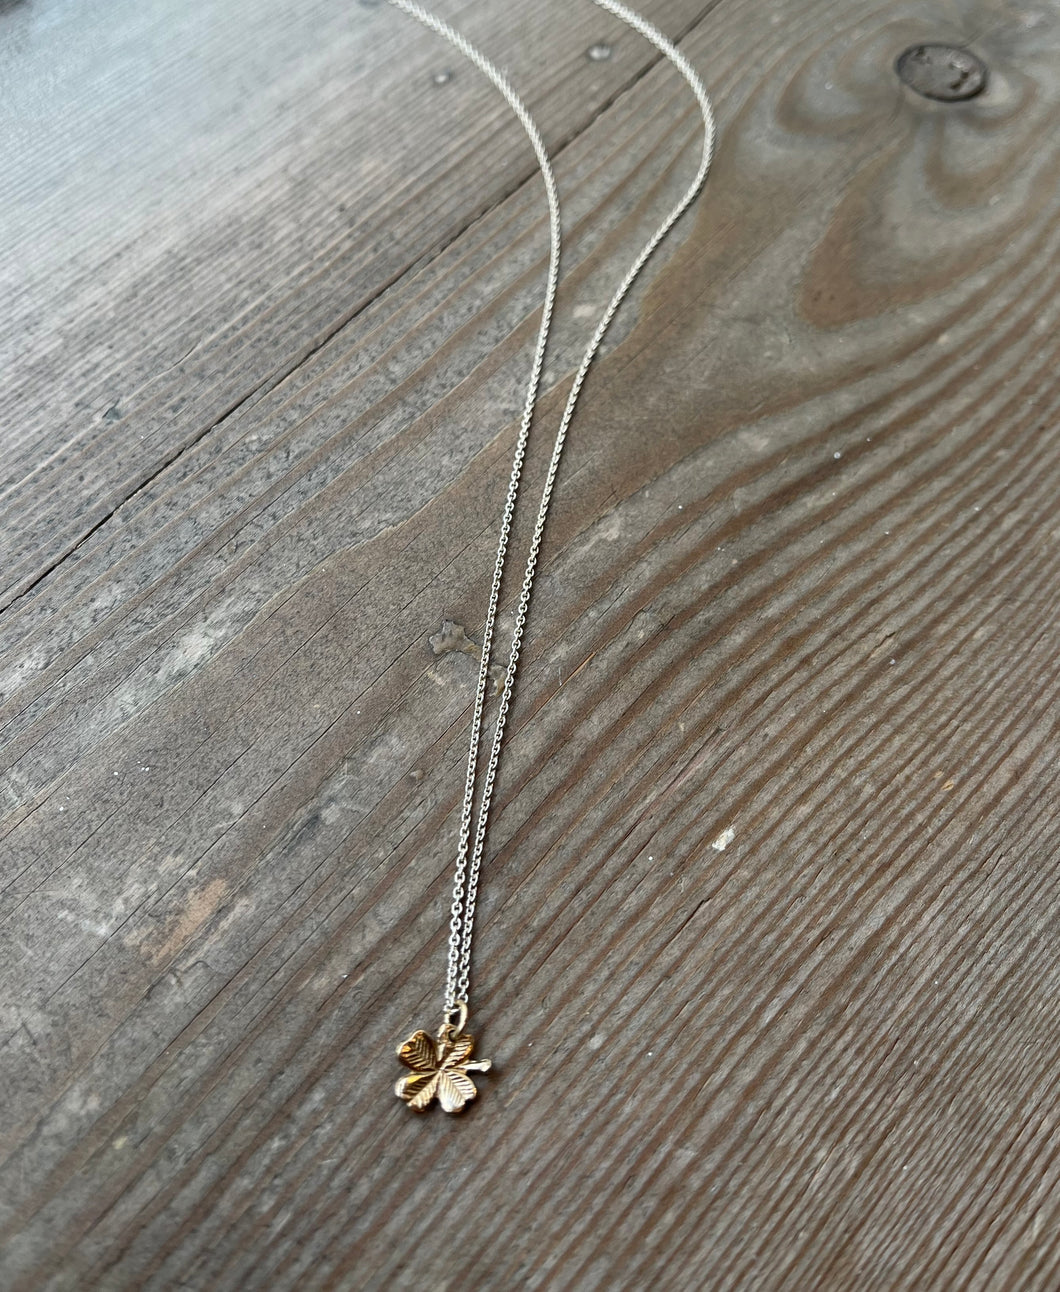 9ct Gold Four Leaf Clover Pendant on Recycled Silver Necklace